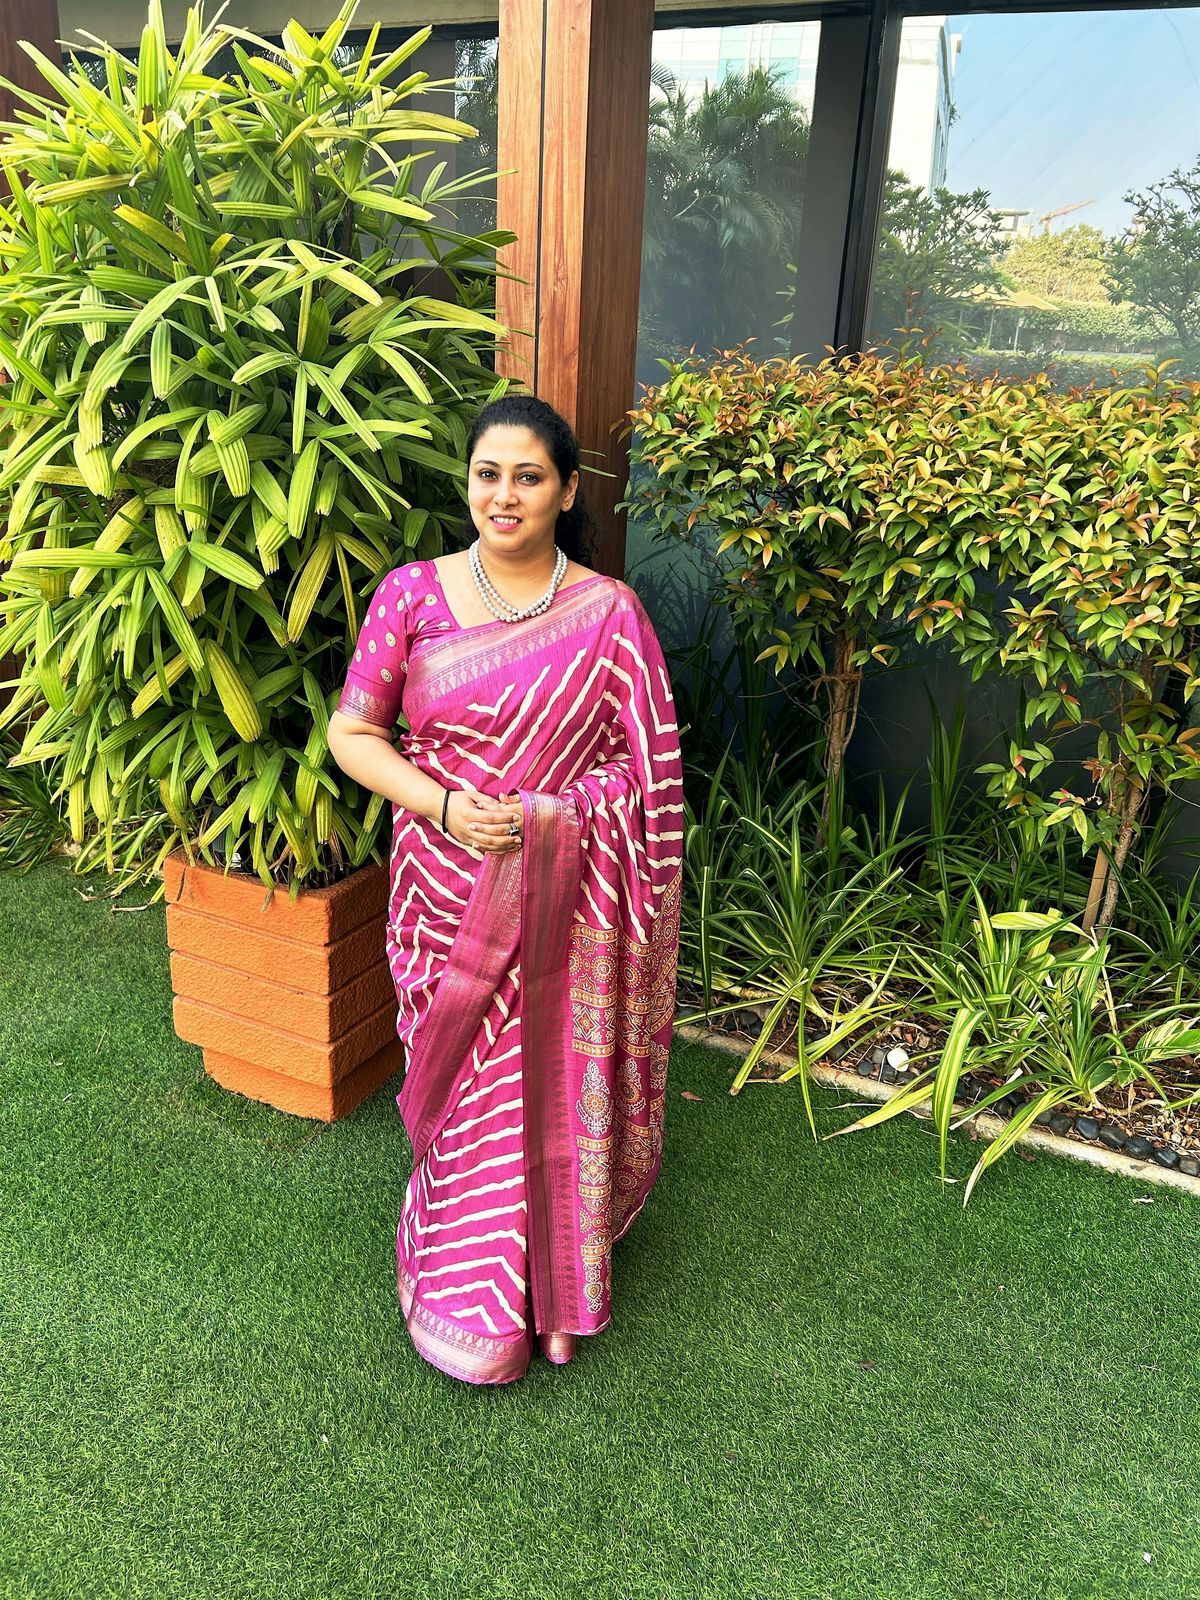 Priti Jha Appointed as Director of Operations for Courtyard By Marriott